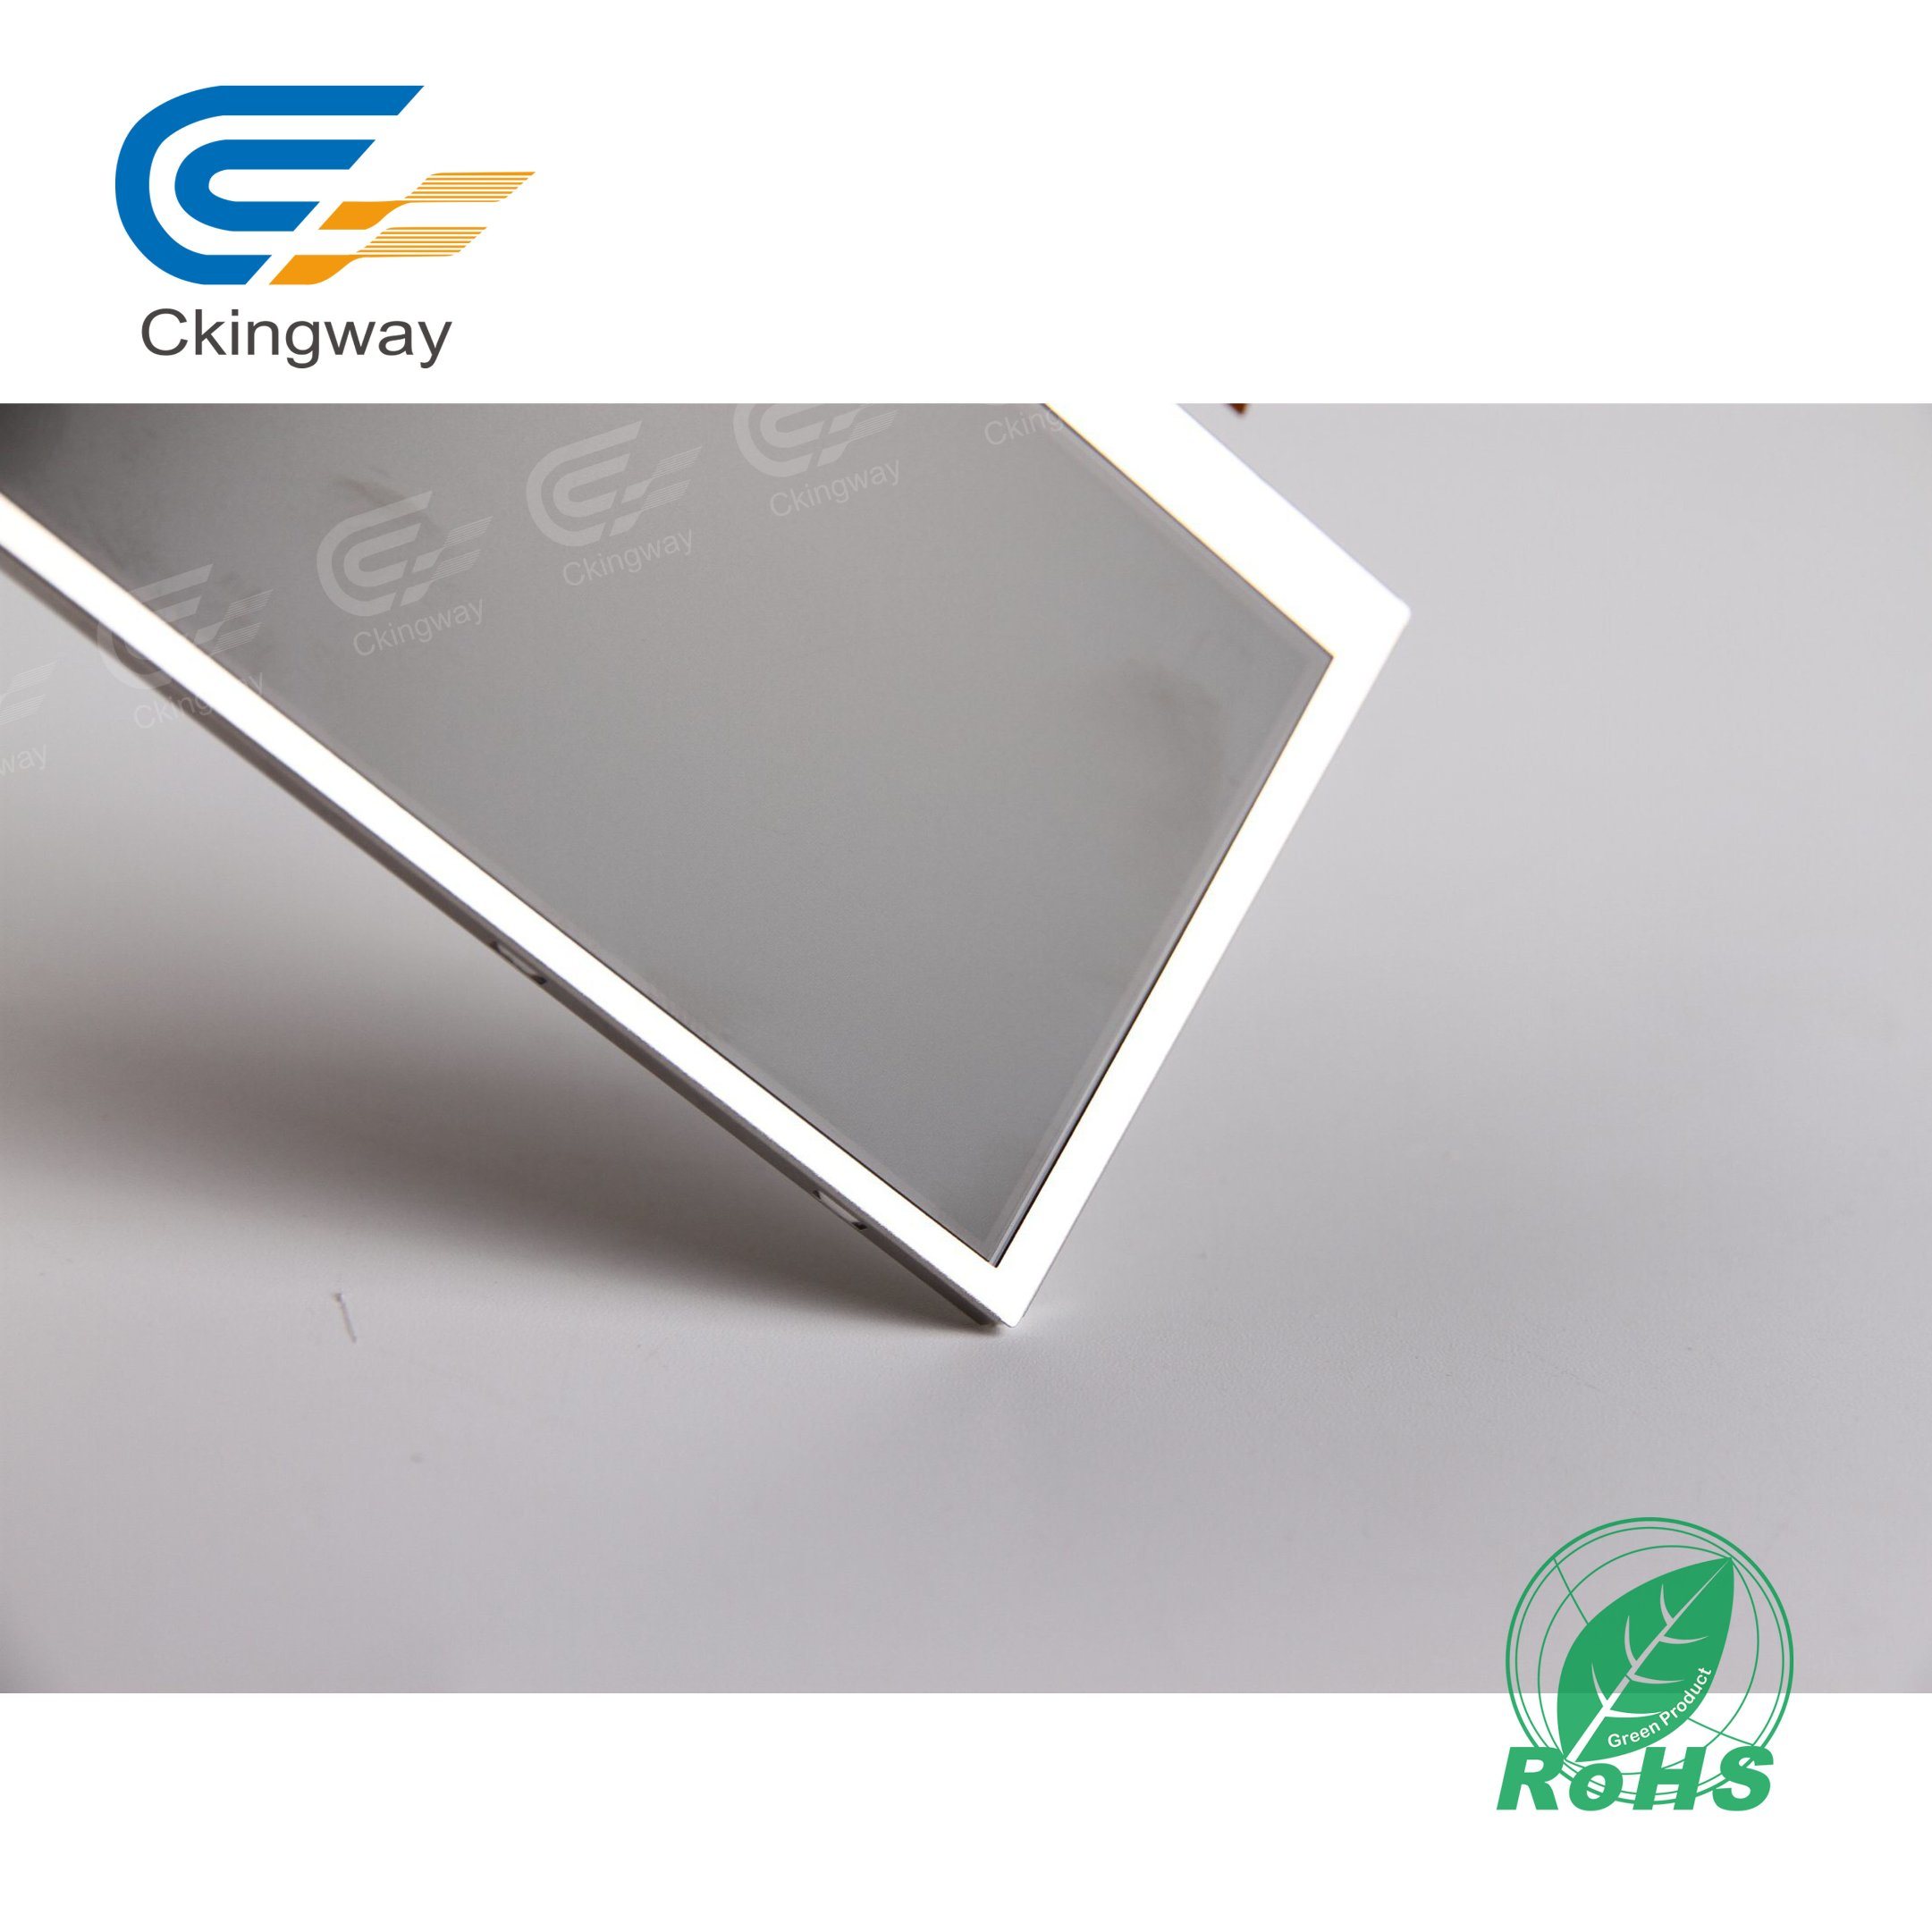 Industry Grade 4.3 Inch for Smart Device Without Touchscreen TFT LCD Panel